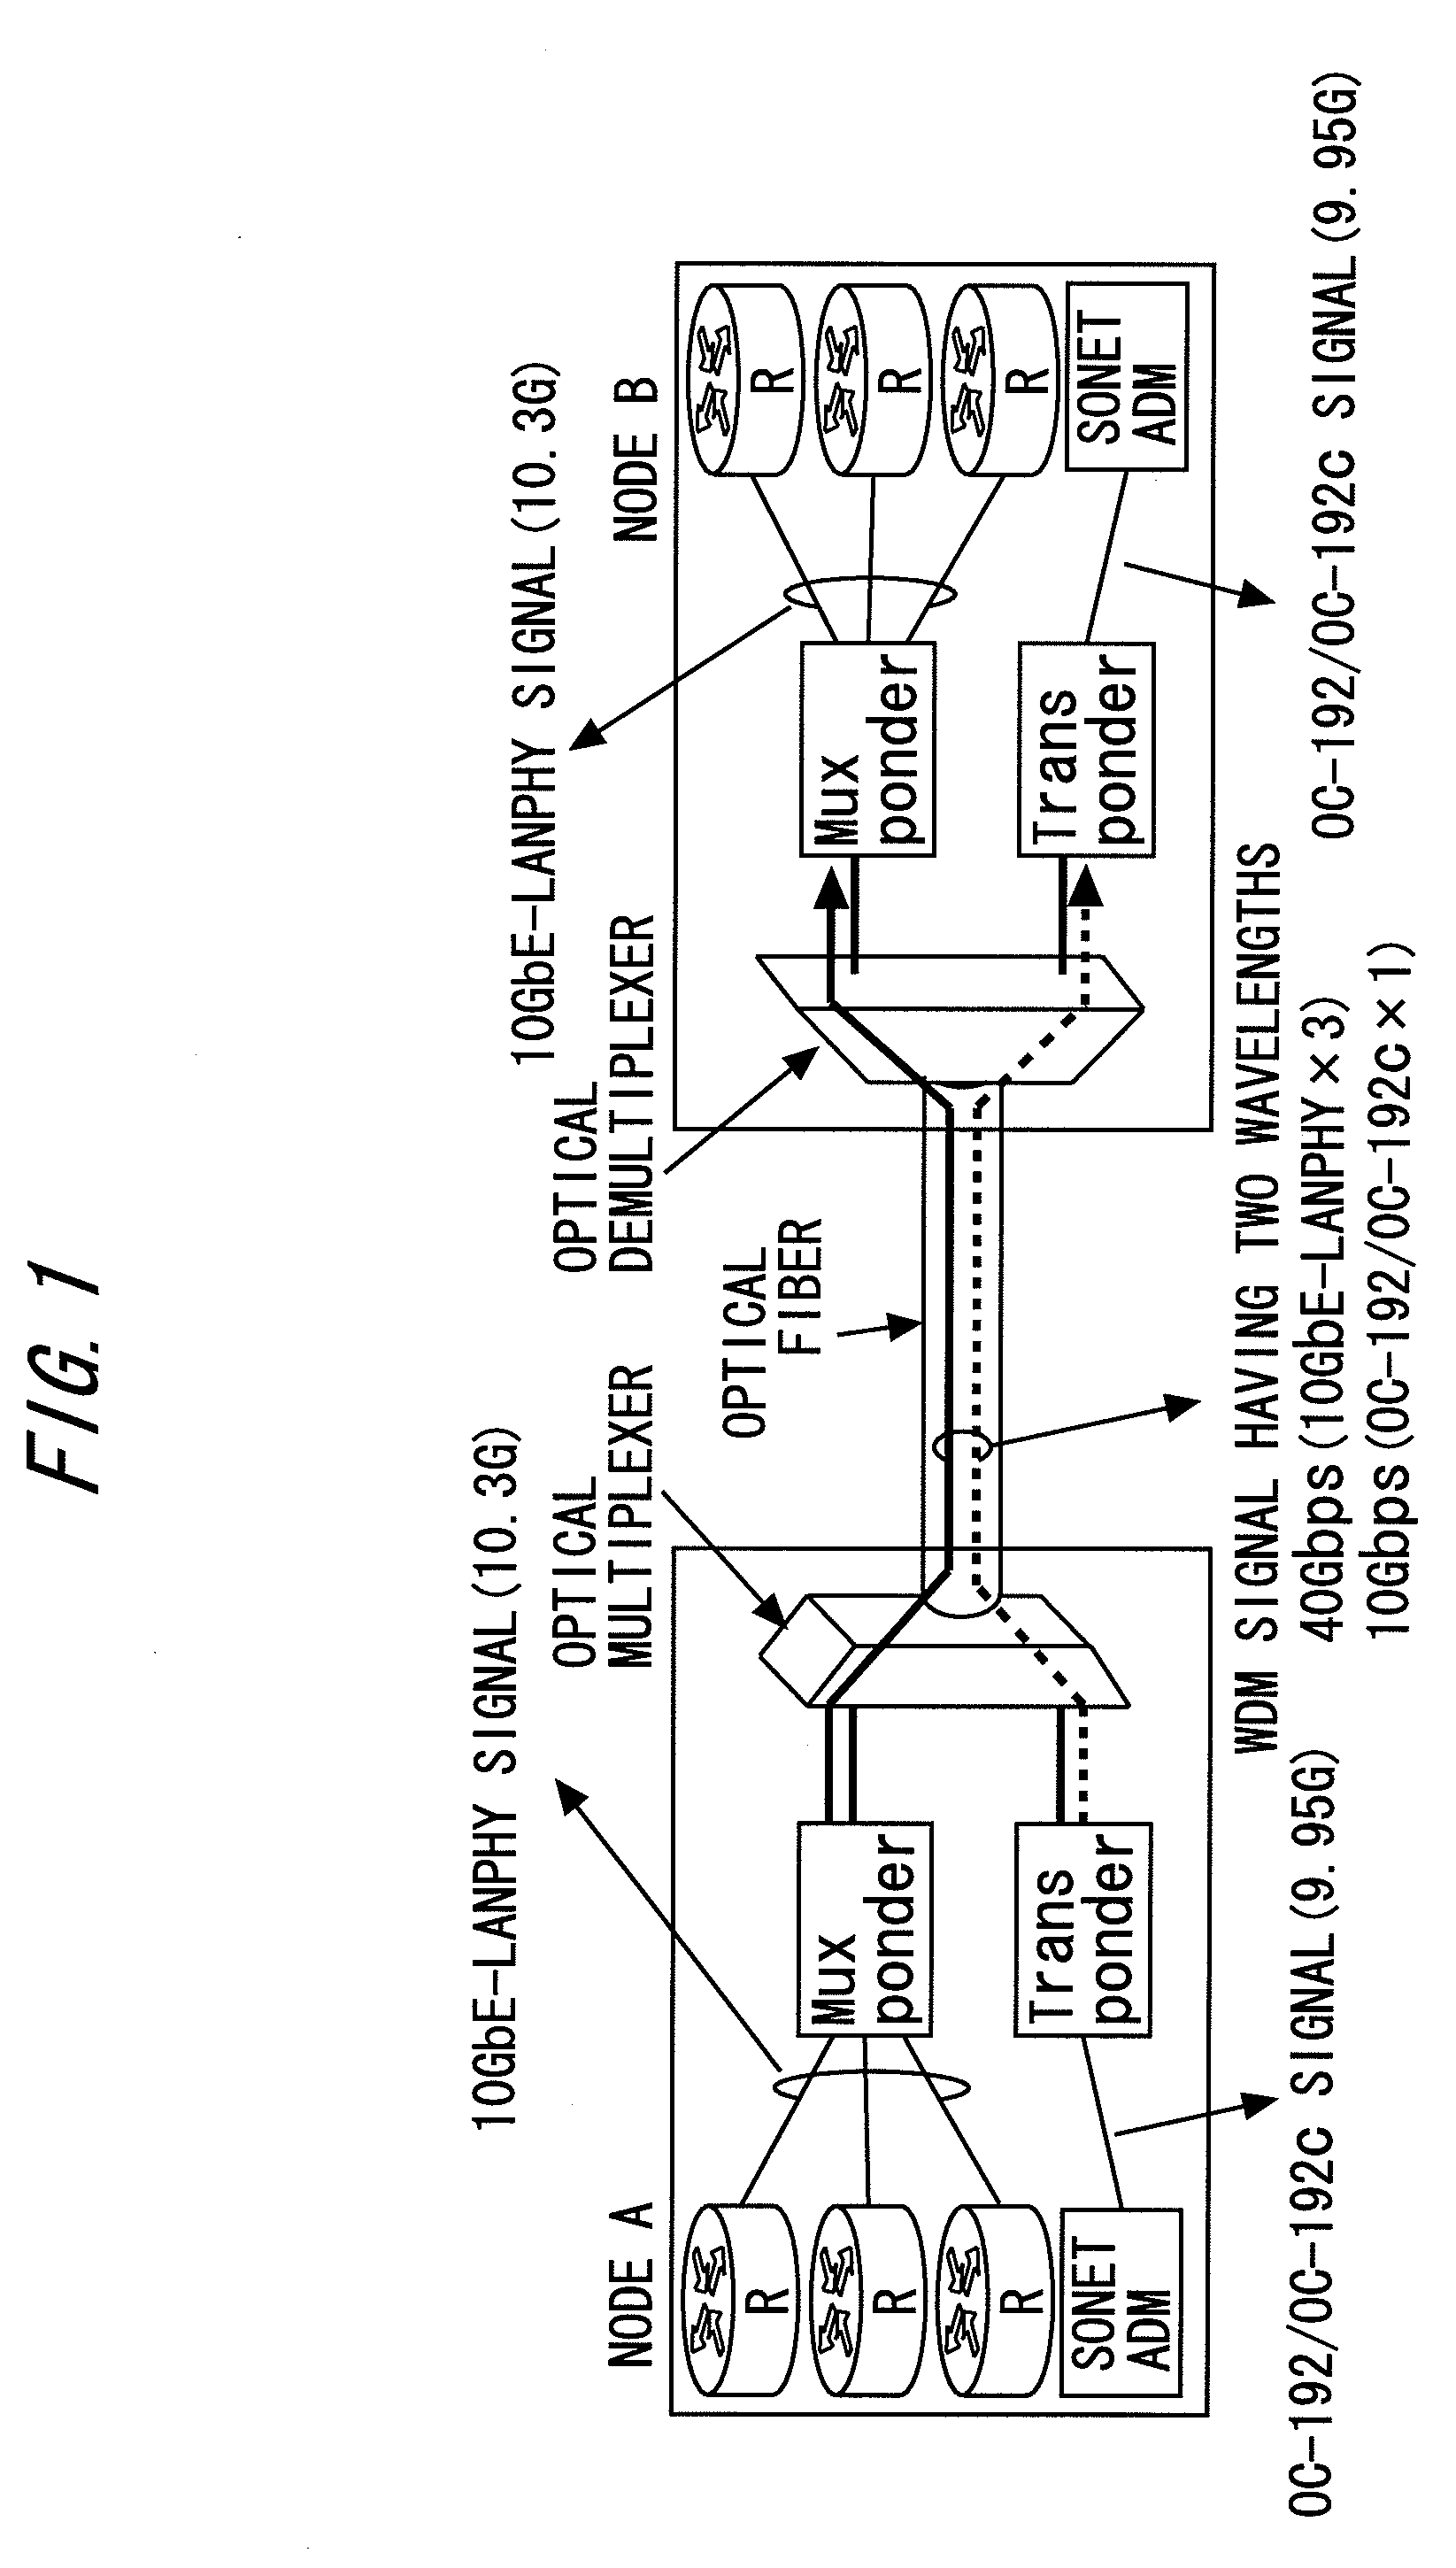 Optical network system